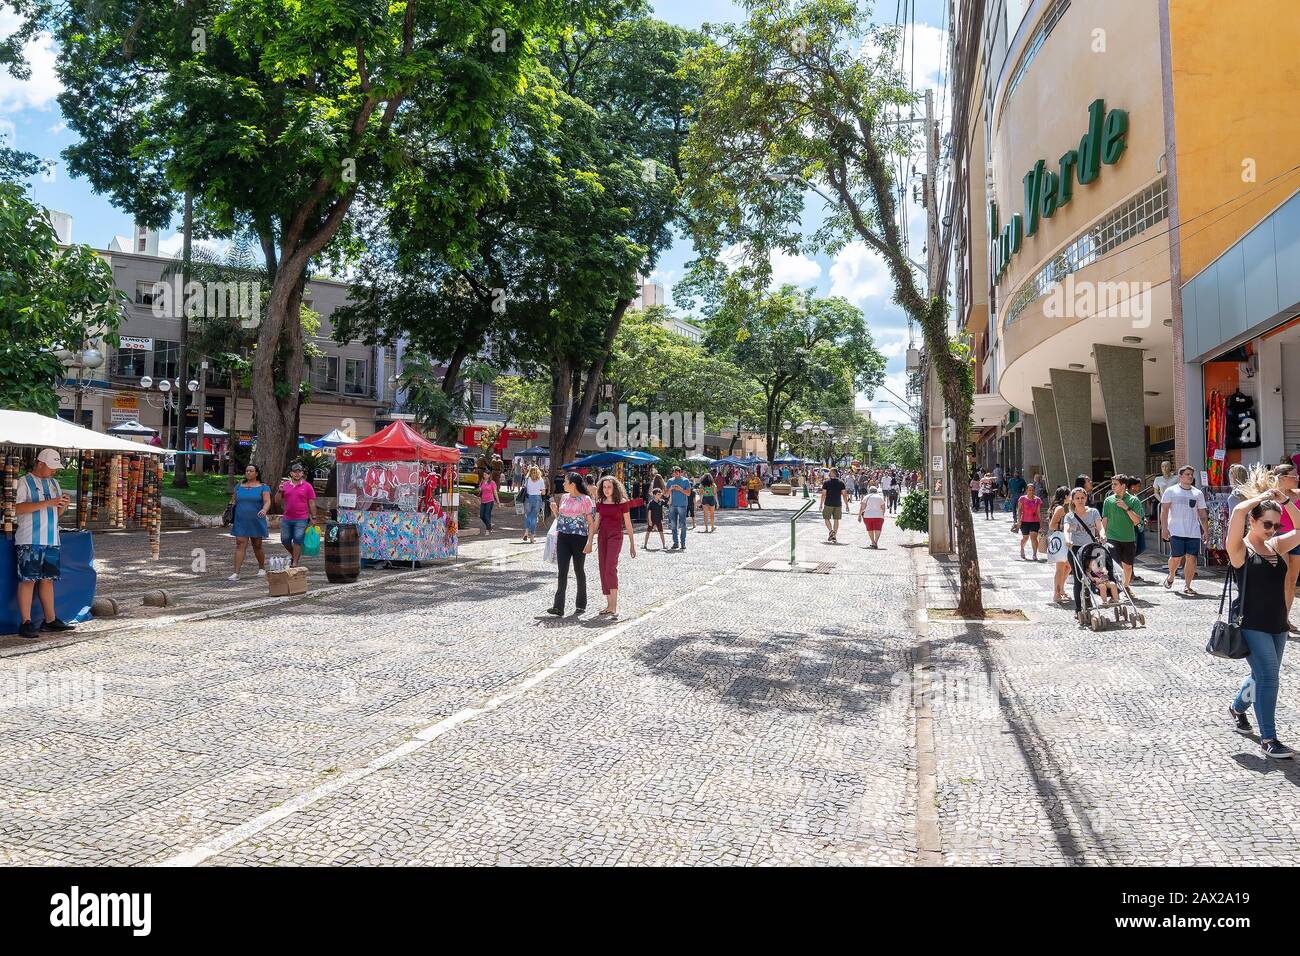 Londrina PR, Brazil - December 23, 2019: Downtown of Londrina. People shopping and walking at the Calcadao in front of Cine Ouro Verde. Stock Photo